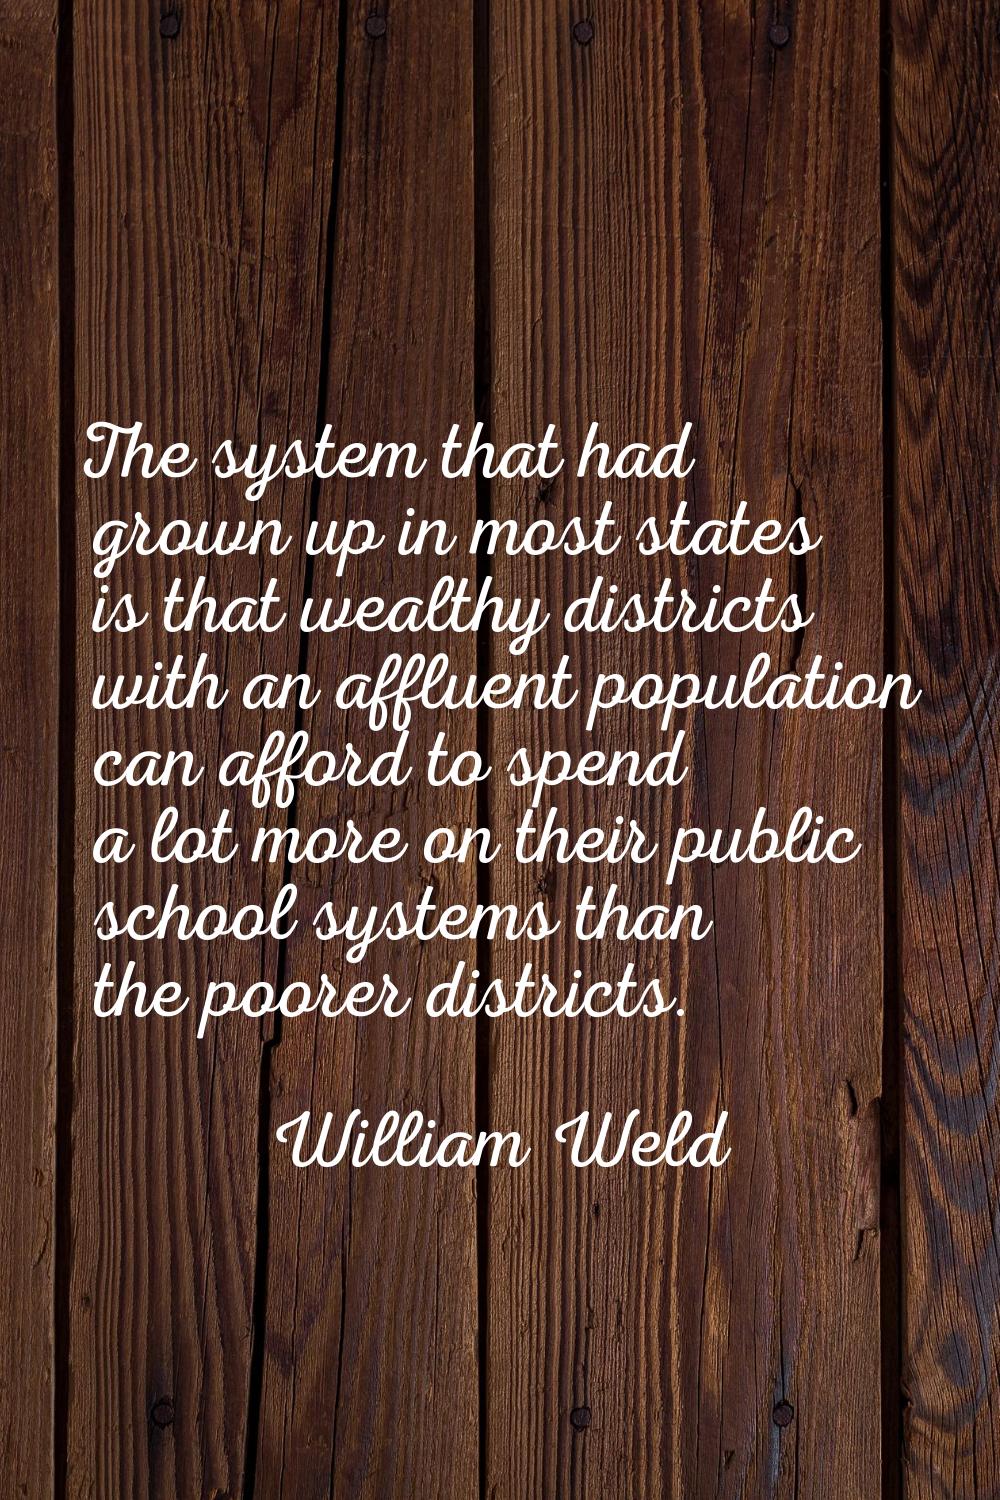 The system that had grown up in most states is that wealthy districts with an affluent population c